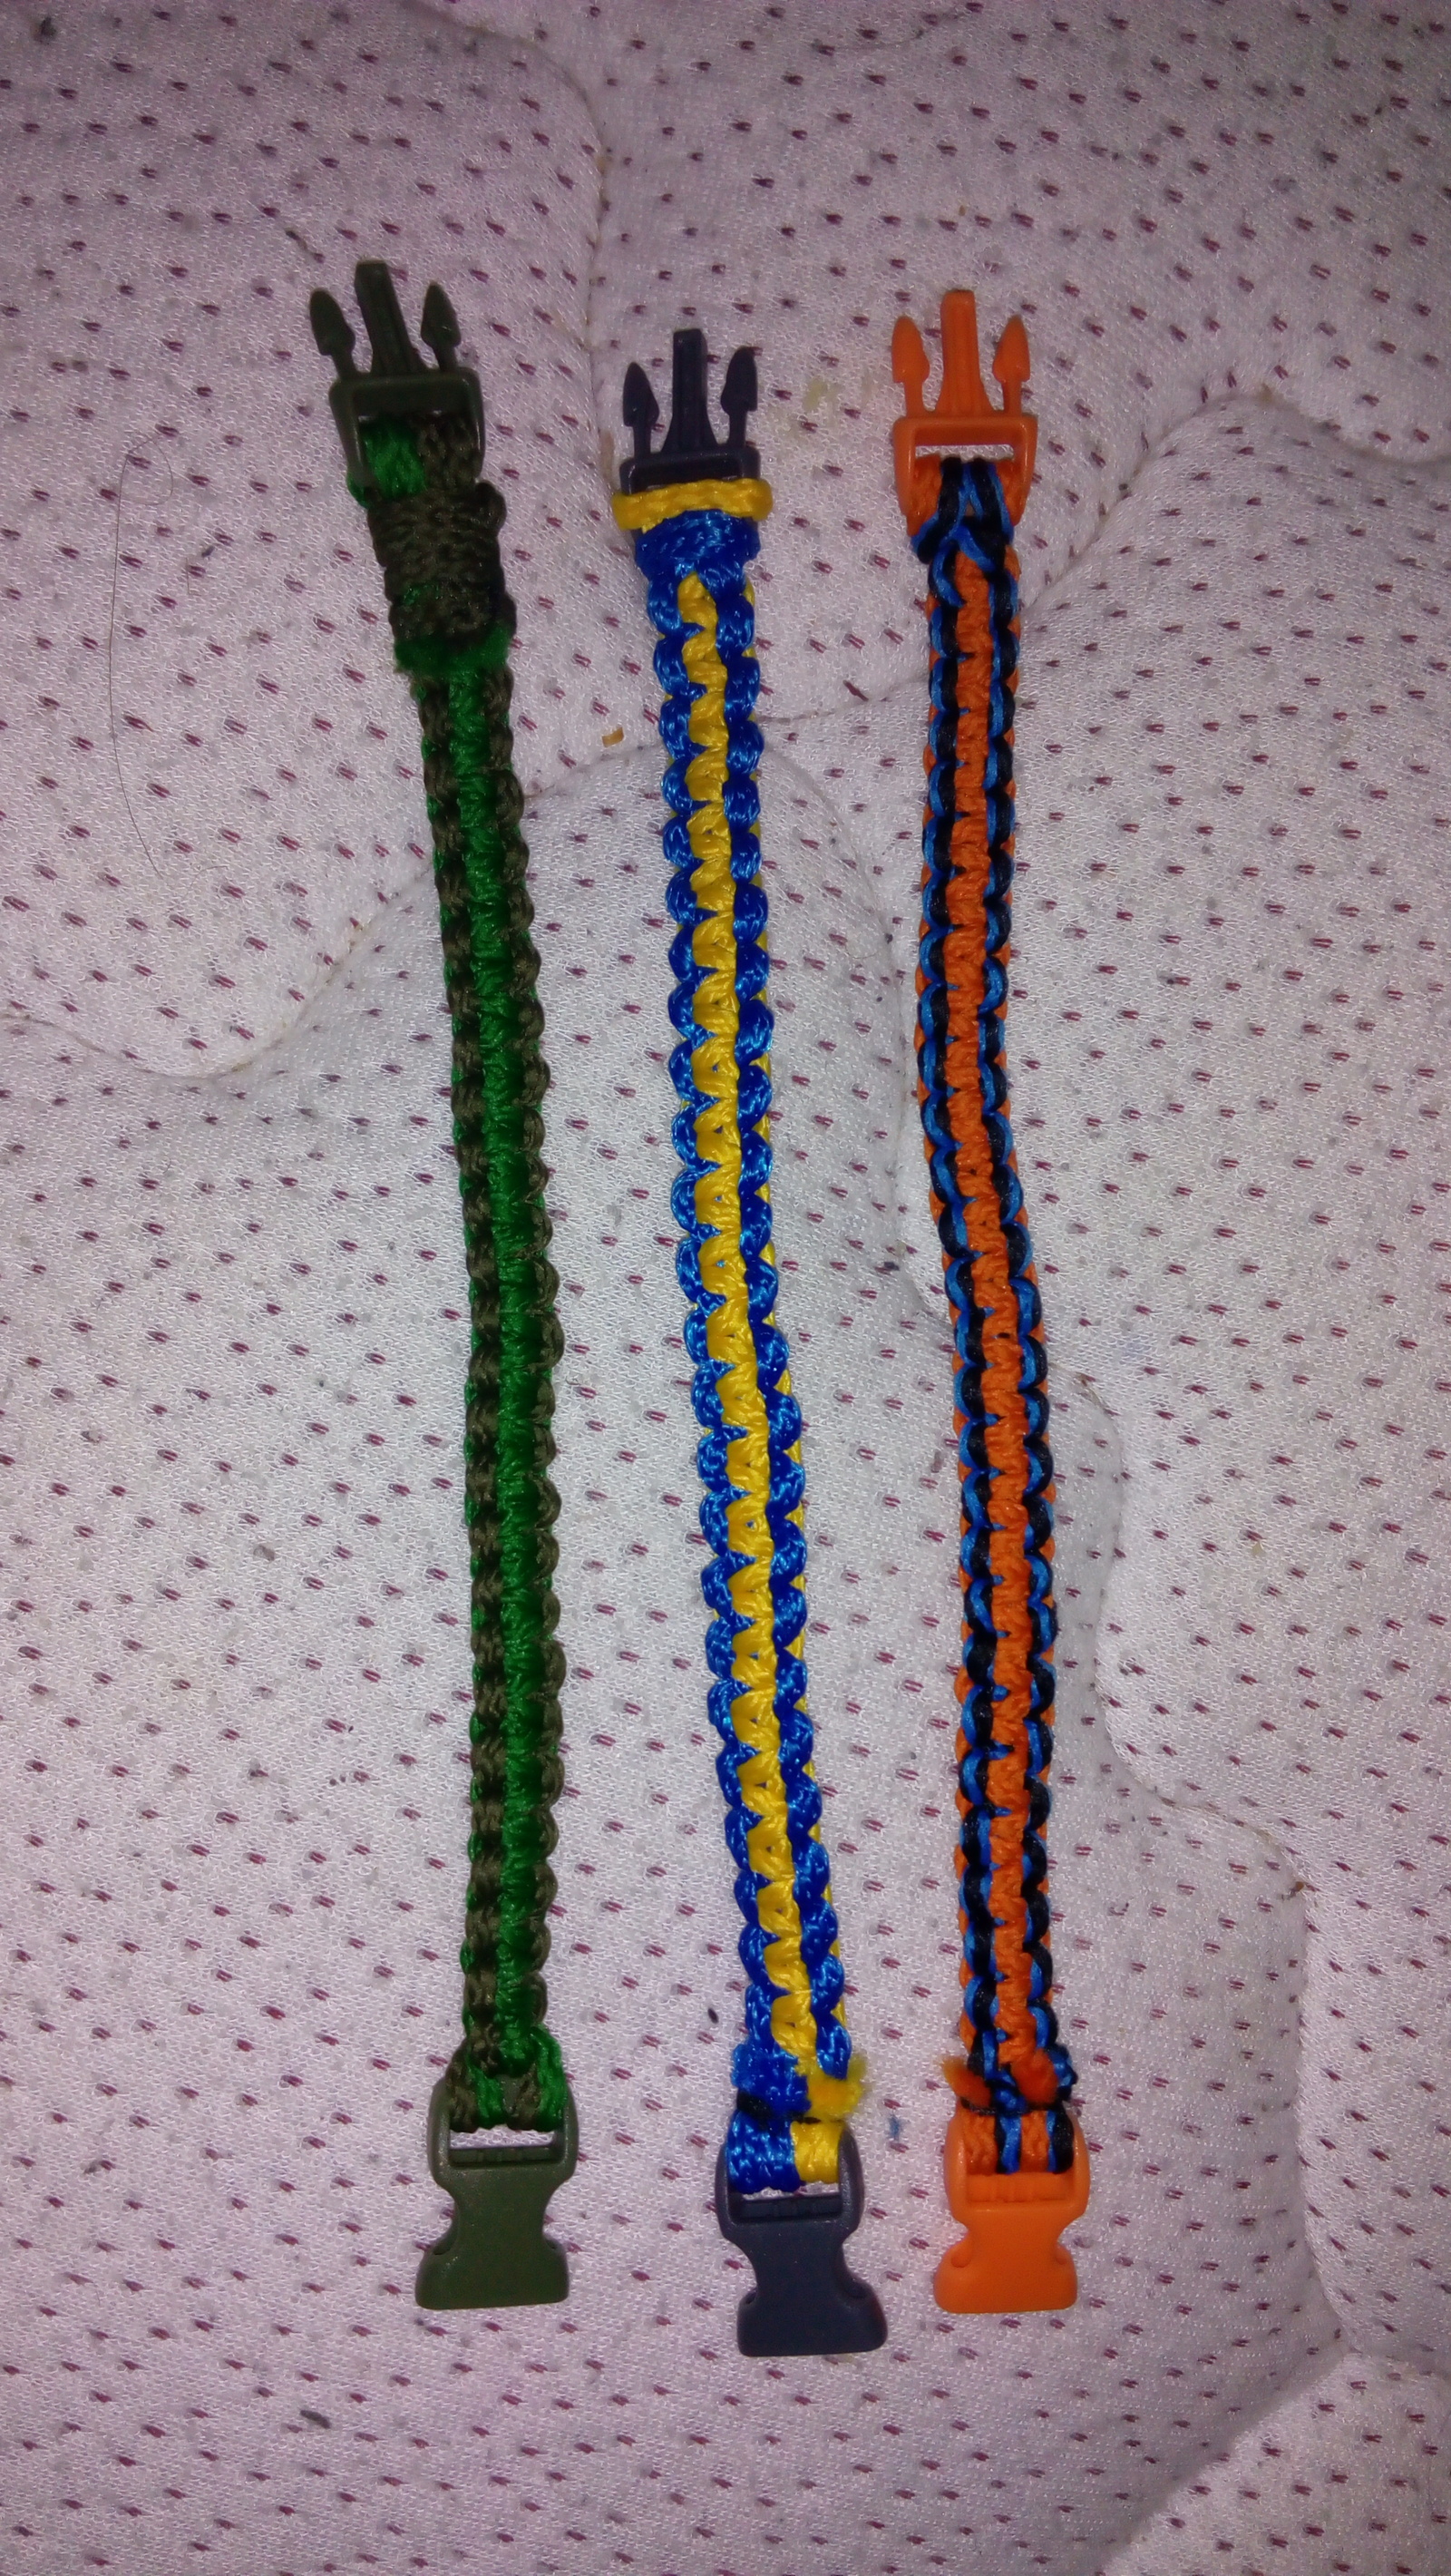 Gift for February 14 - My, Presents, The 14th of February, A bracelet, Weaving